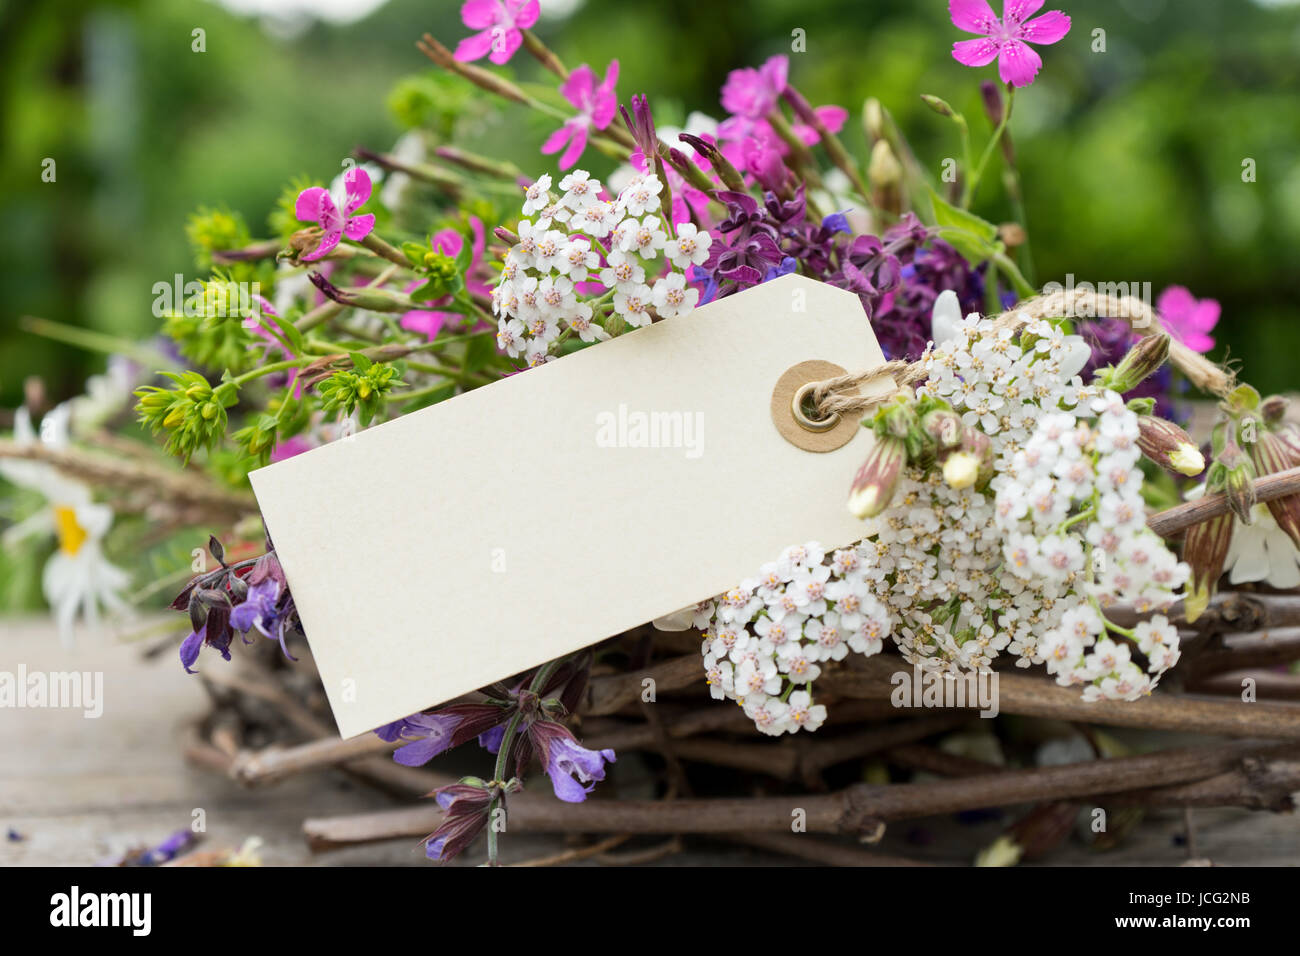 Colorful bouquet with meadow flowers and card Stock Photo